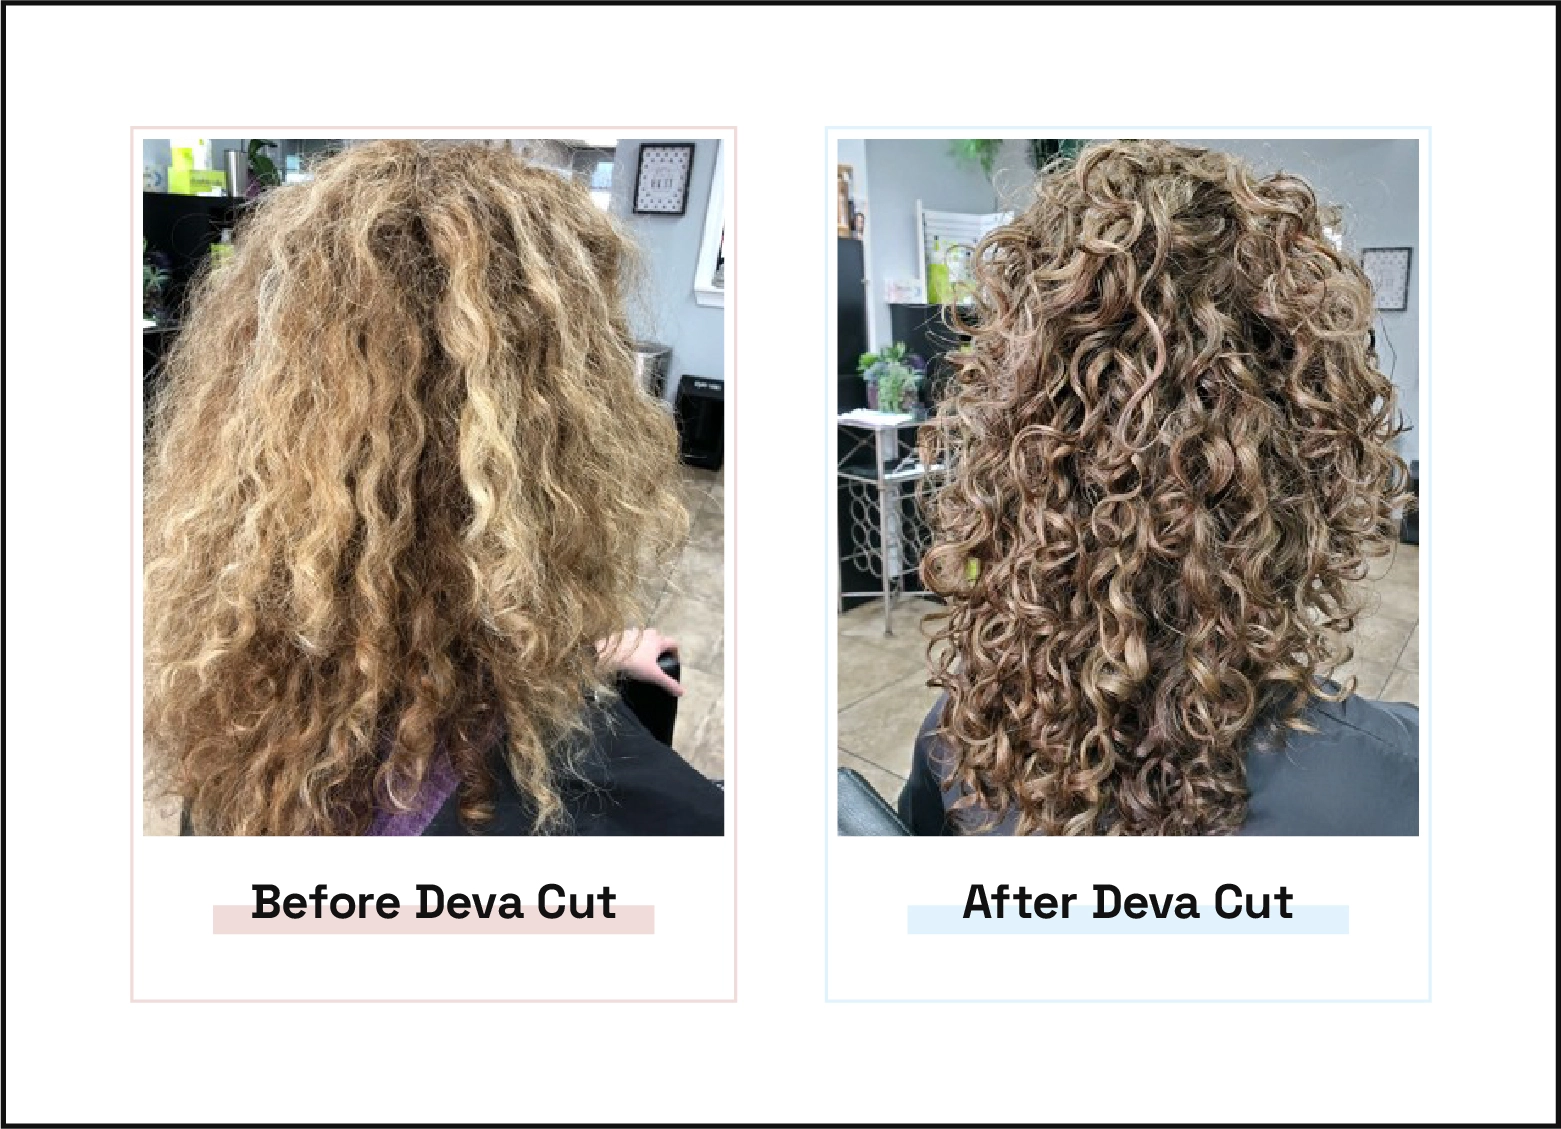 Image shows before and after of a Deva cut.